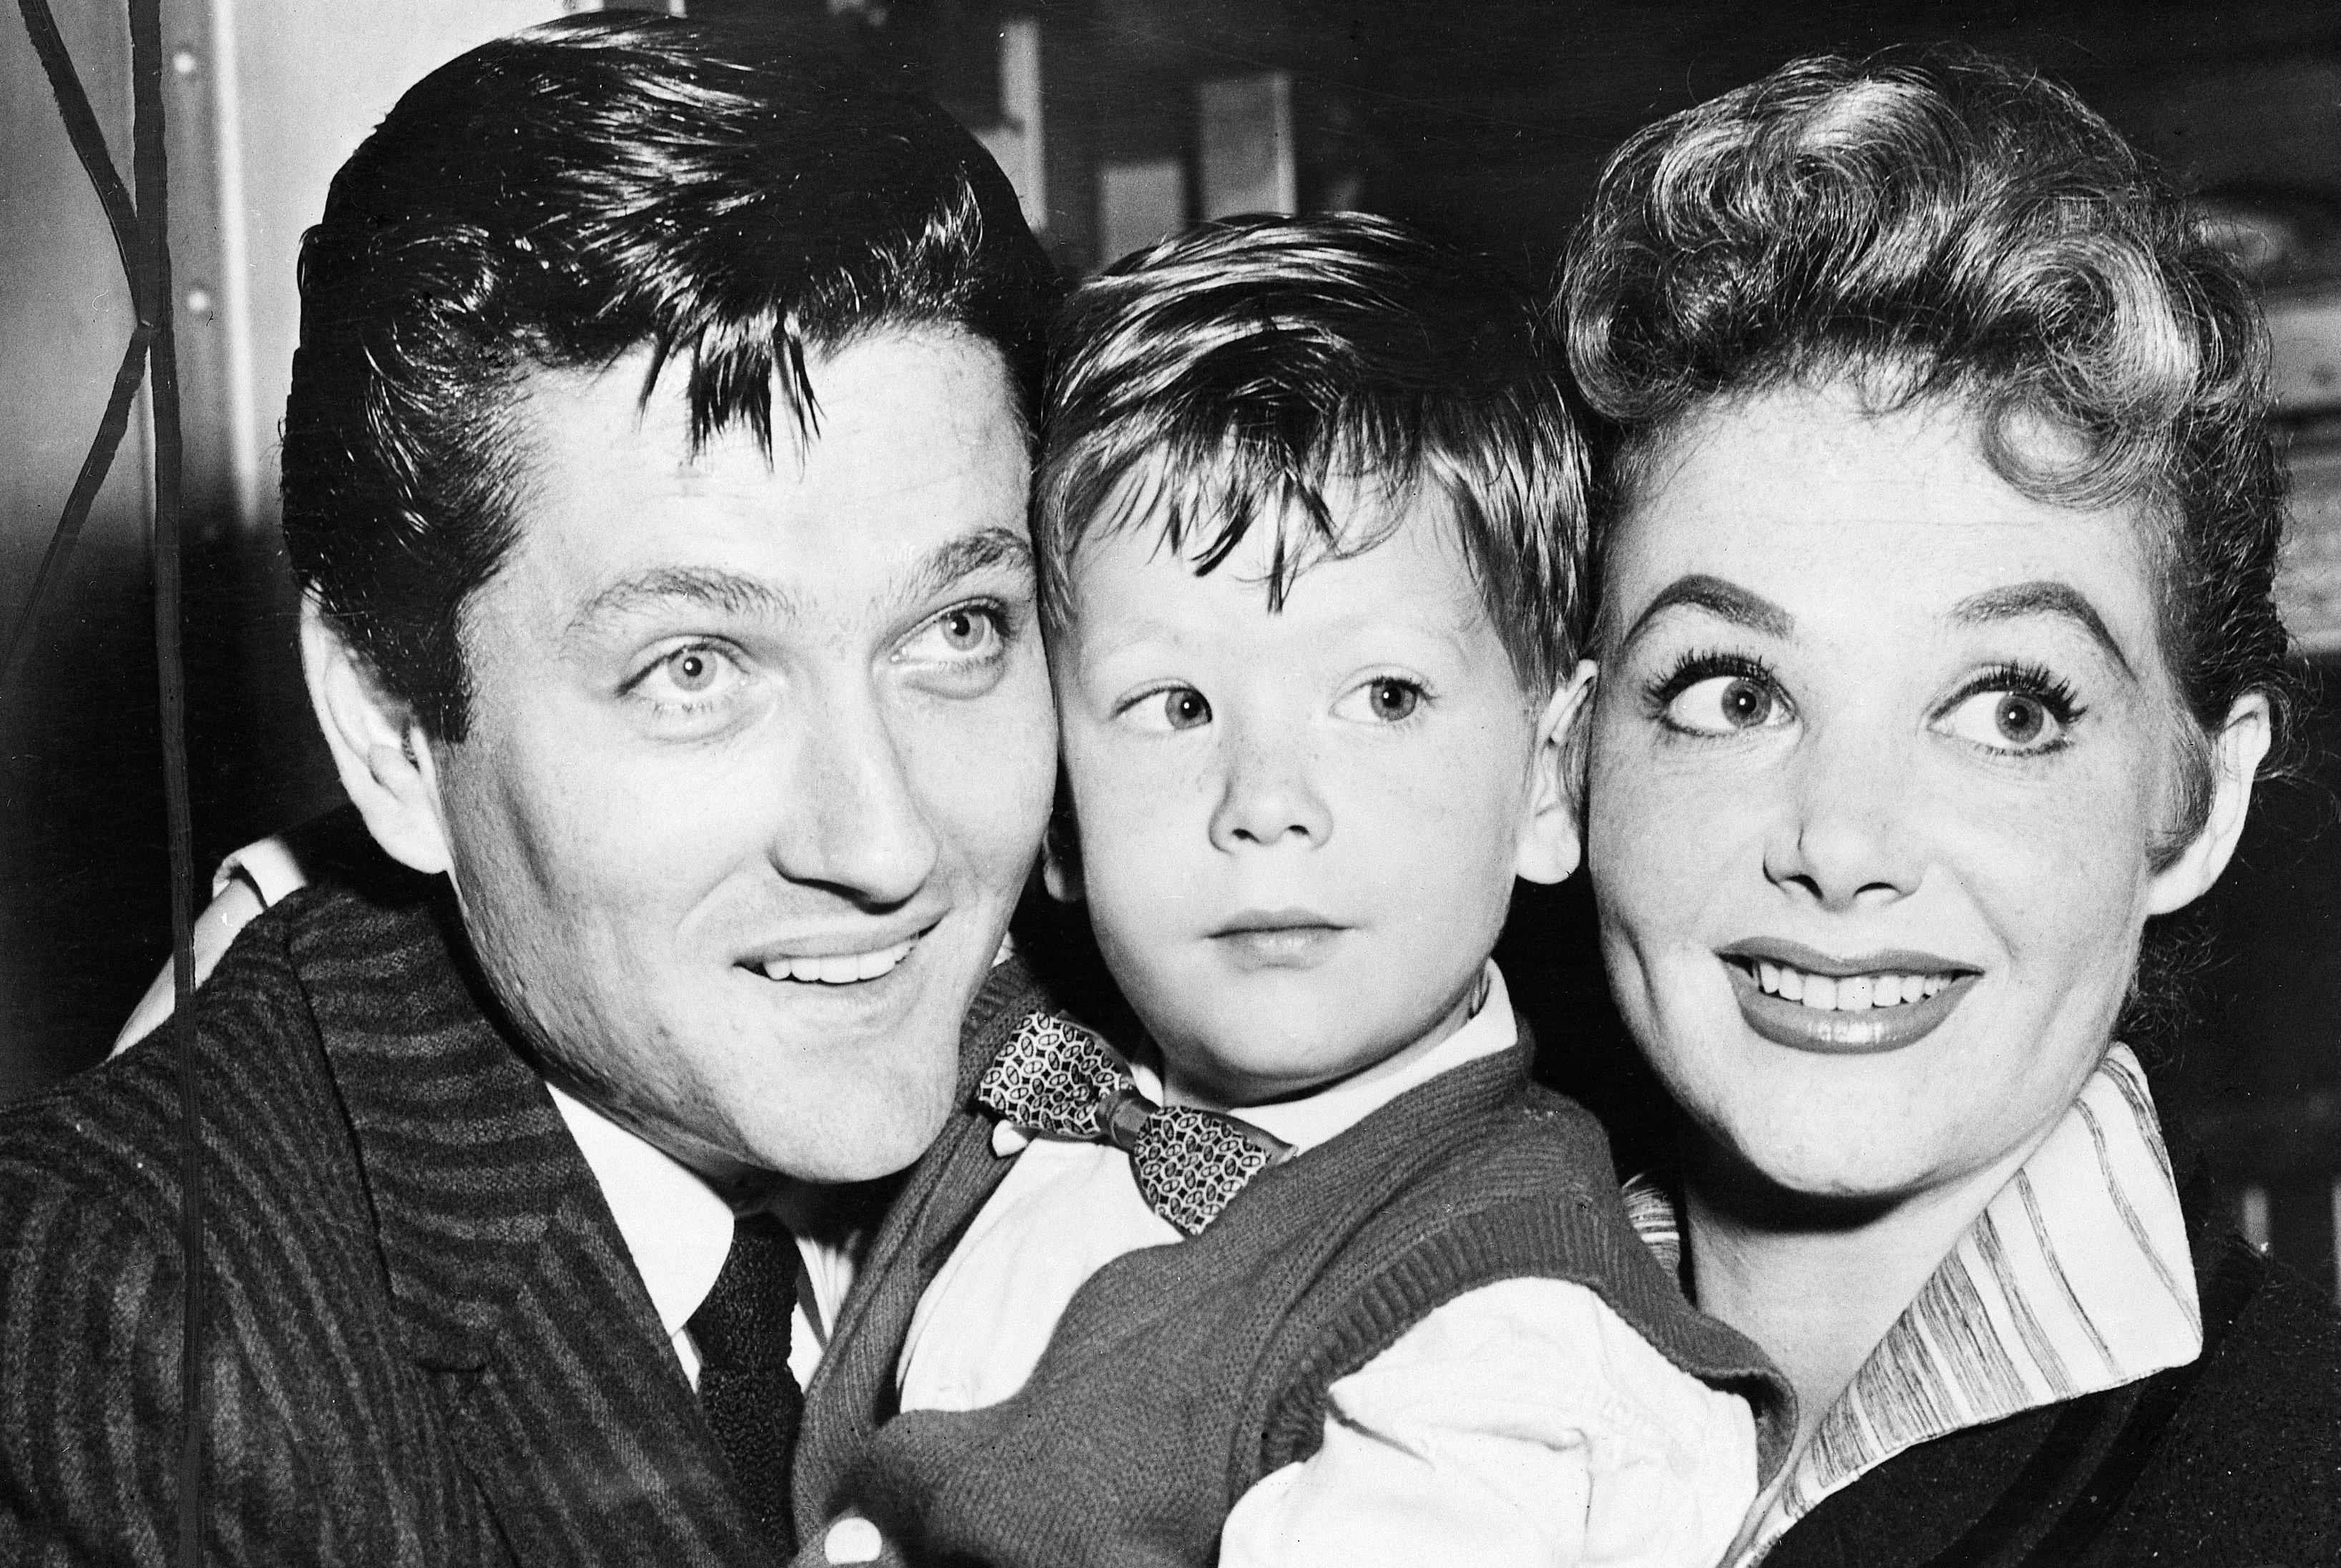 John Drew Barrymore, Cara Williams, and their son, John Barrymore, Jr., on August 30, 1957 | Source: Getty Images